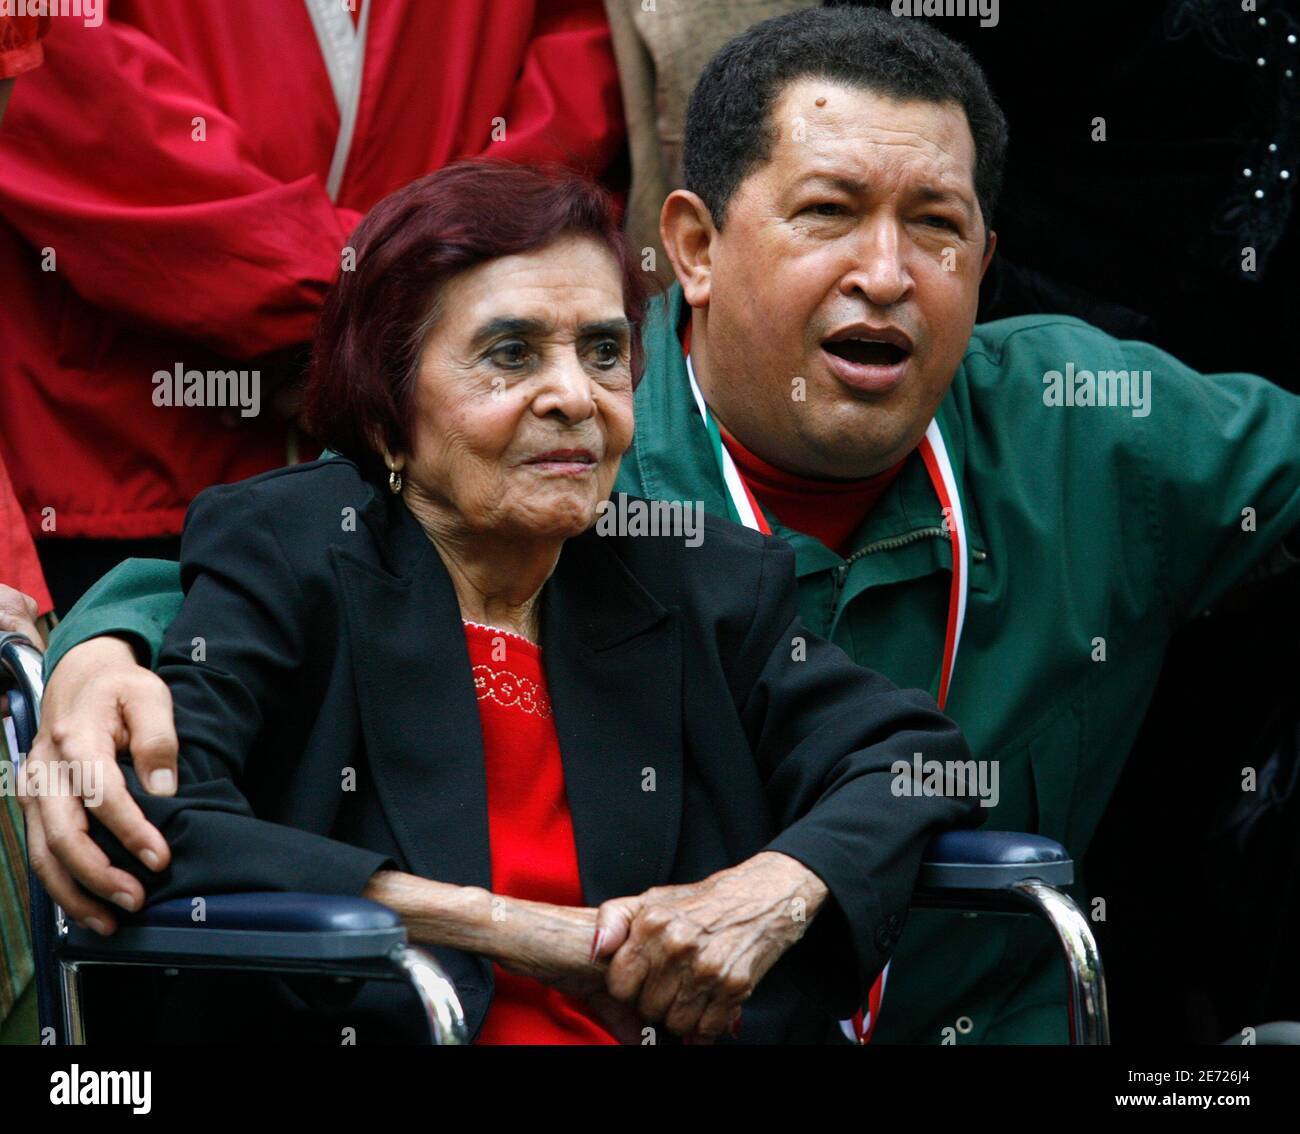 Venezuelan President Hugo Chavez sings mariachi songs to Ana Maria Zapata,  daughter of Mexican revolutionary hero Emiliano Zapata, as they attend the  inauguration of an exhibition about Zapata on the 90th anniversary